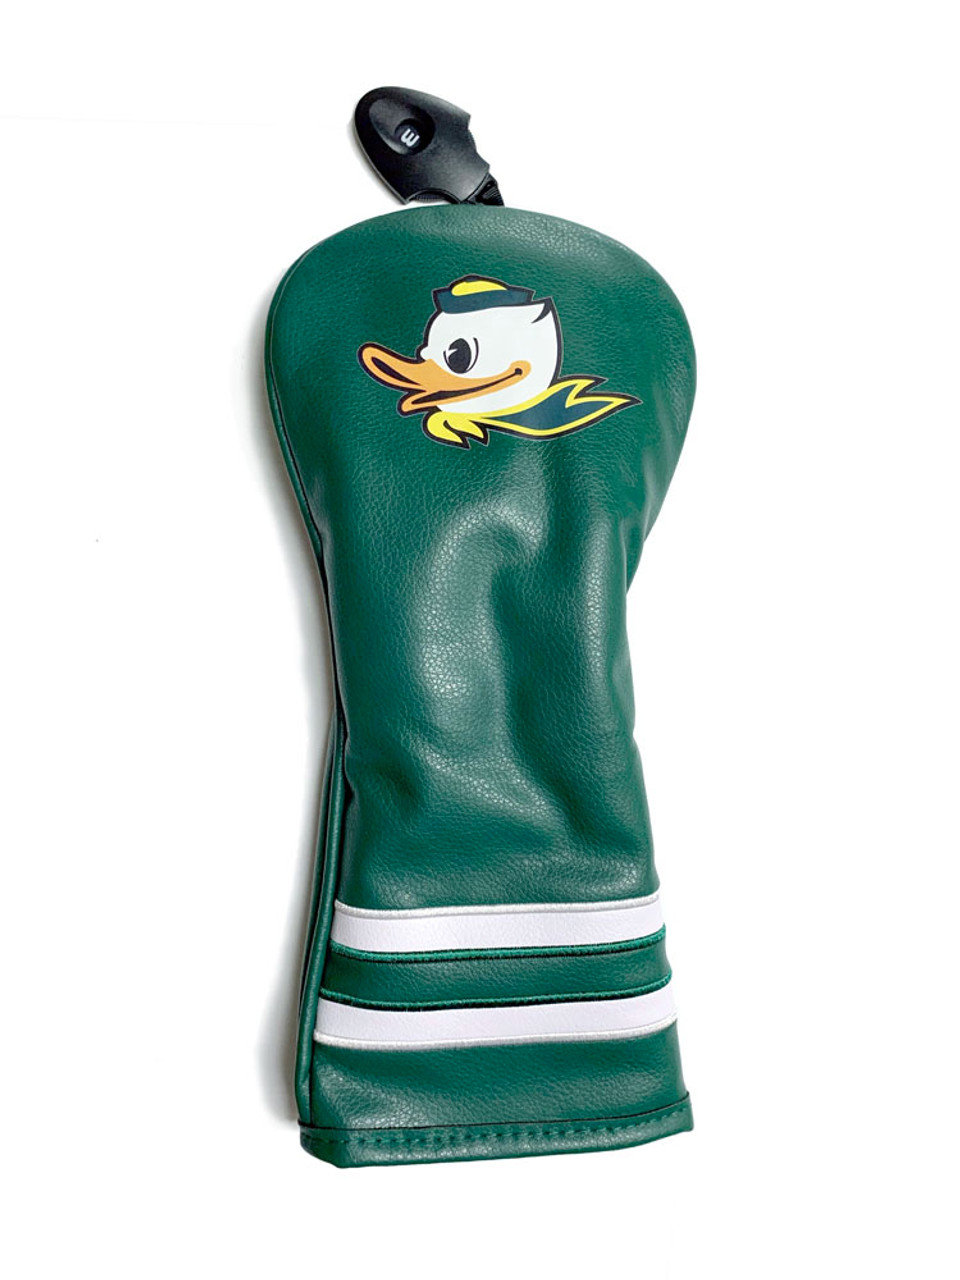 https://cdn11.bigcommerce.com/s-p4e2op94ll/images/stencil/1280x1280/products/2186/9507/headcover-vintage-fairway-fighting-duck__41308.1653580271.jpg?c=2